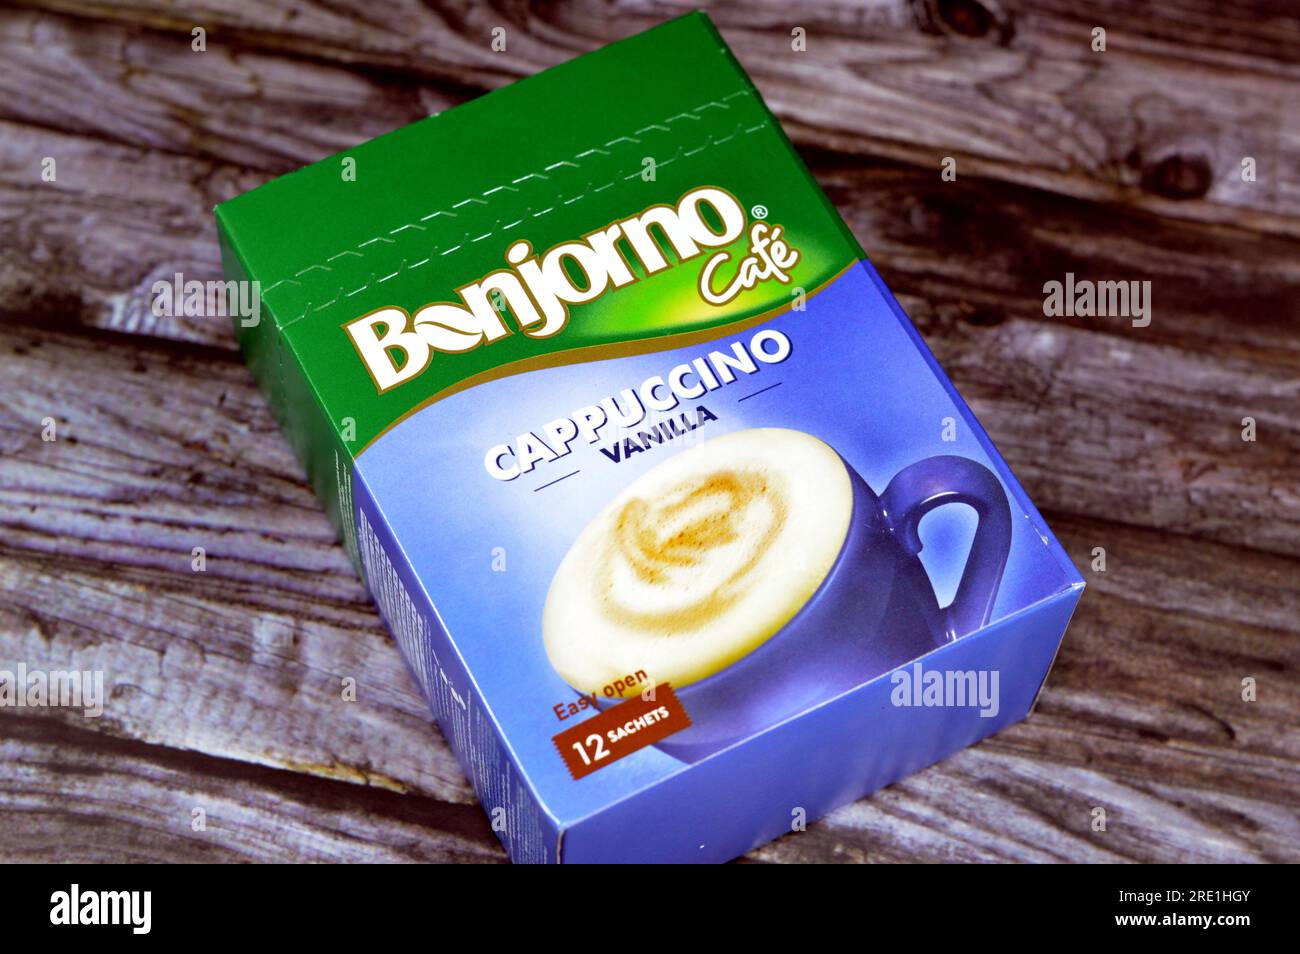 Giza, Egypt, July 21 2023: Bonjorno cafe vanilla cappuccino easy open sachets by Nestle, Nestle is a Swiss multinational food and drink processing con Stock Photo